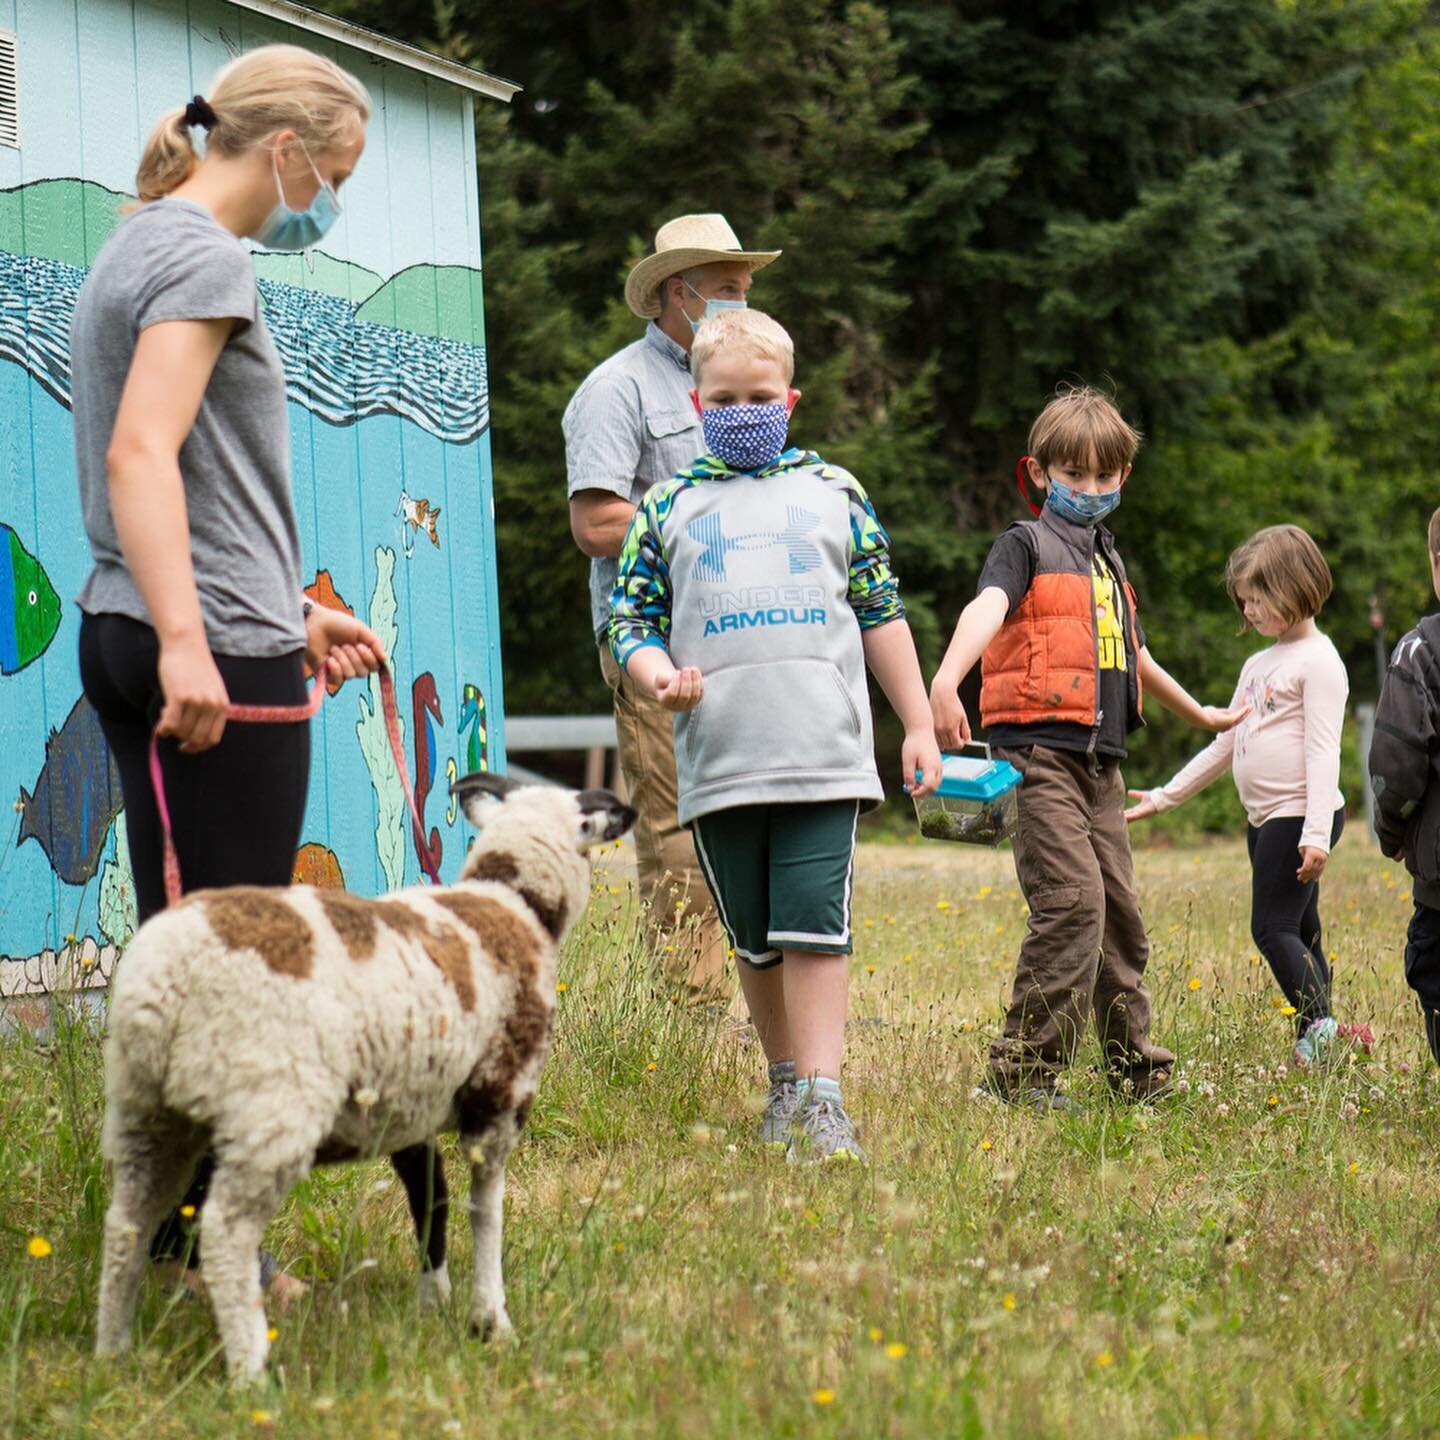 What a fun day. Sid the Sheep really knows how to make a kid's day. Yesterday Sid visited Vashon Kids Summer Camp as part of his mayor election campaign tour. The kids were delighted to see him and each took turns feeding and petting him. Sid is just